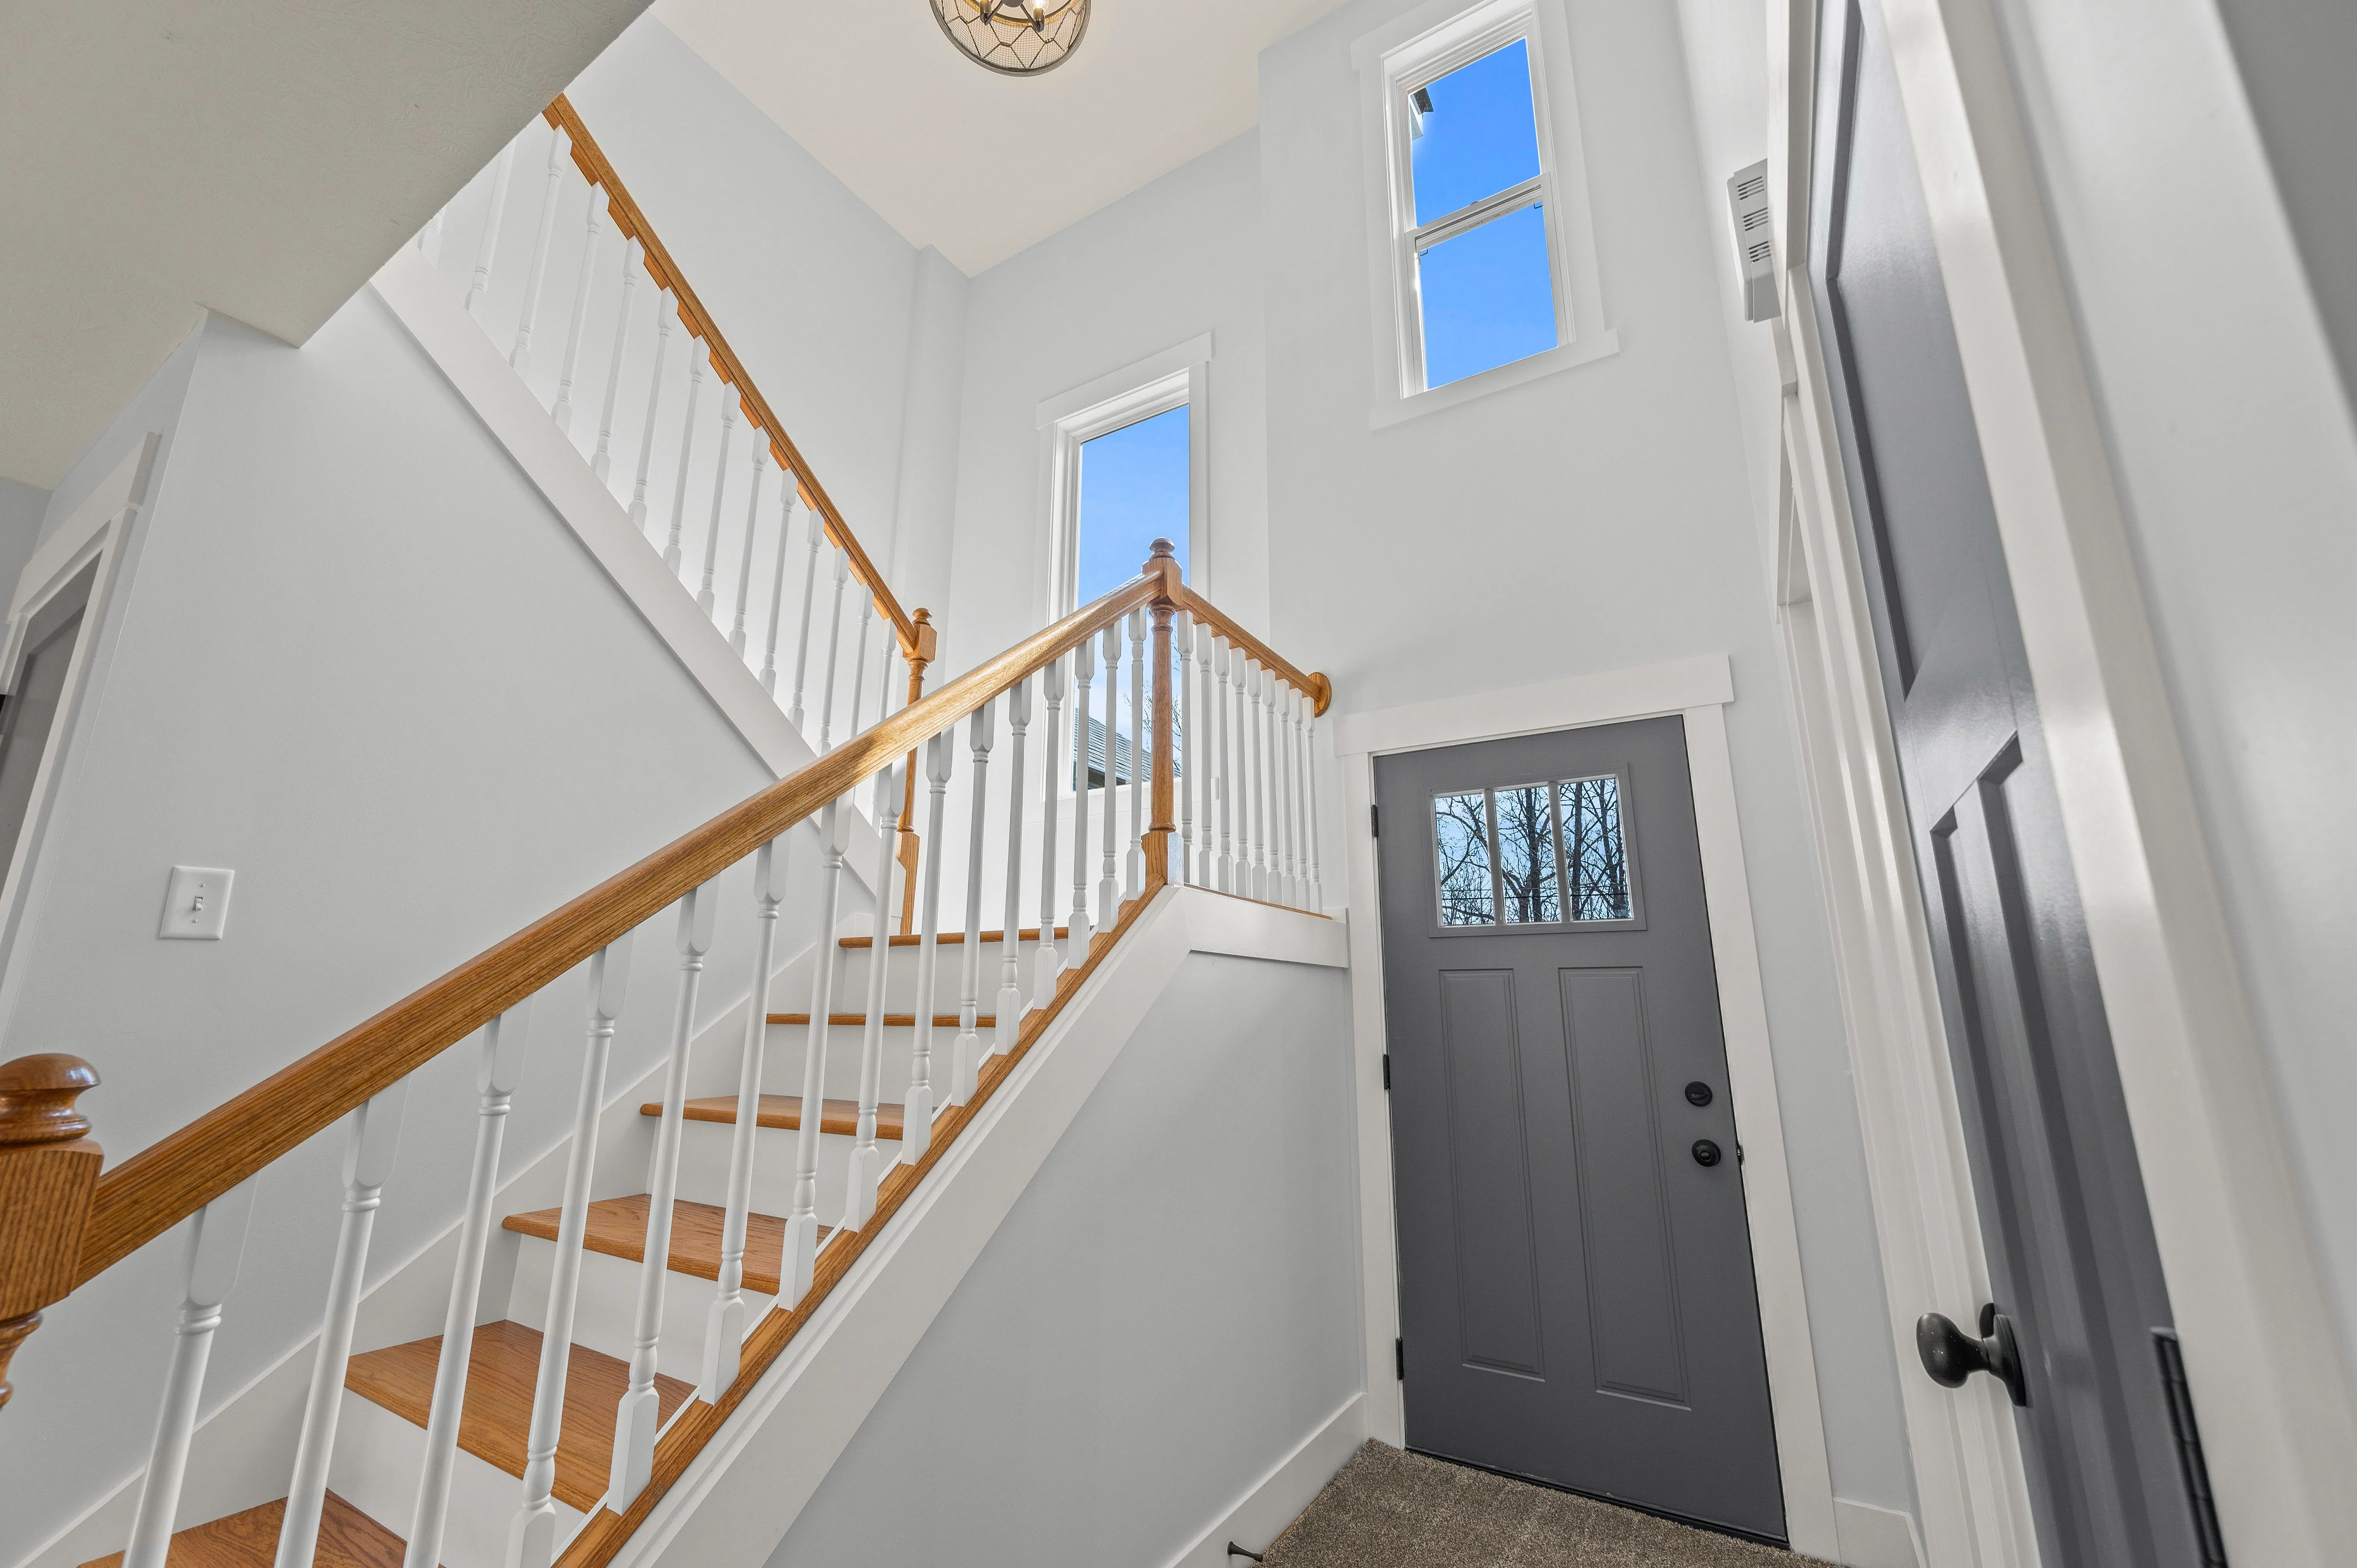 Bright entryway with staircase, wooden handrail, and white spindles, leading upstairs with a view of a gray front door and two windows.